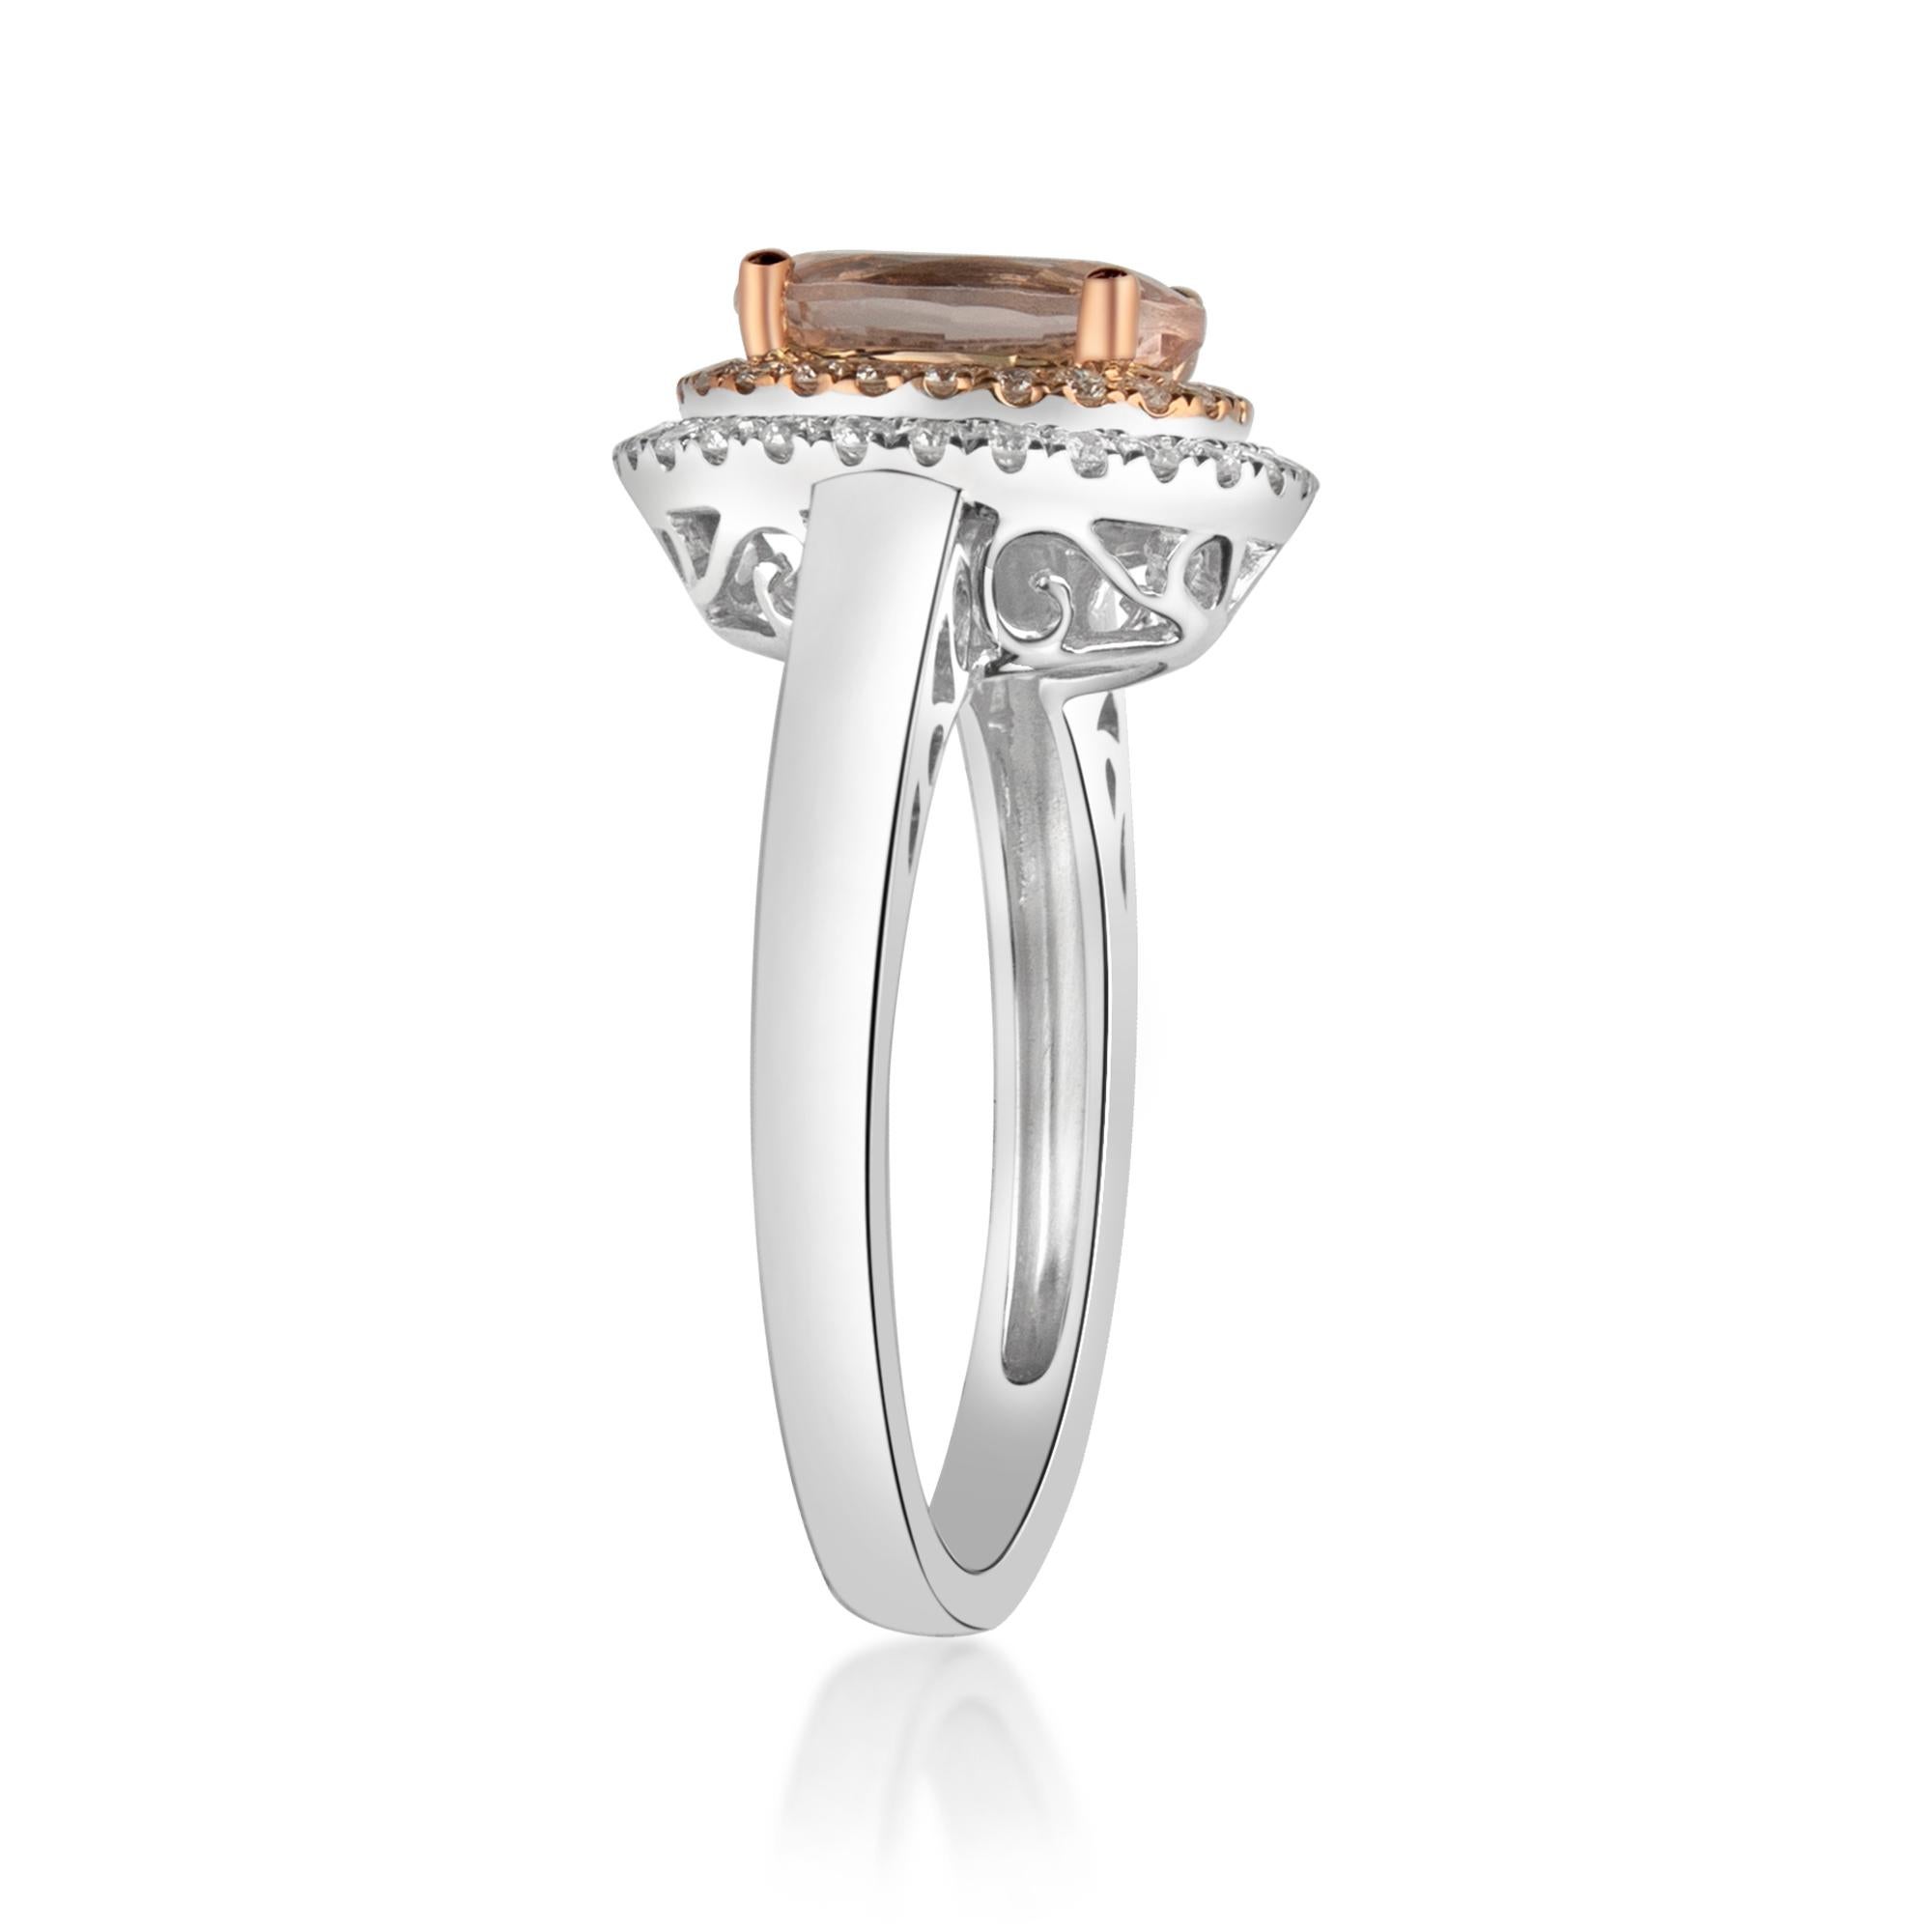 Stunning, timeless and classy eternity Unique Ring. Decorate yourself in luxury with this Gin & Grace Ring. The 14k Two Tone Gold jewelry boasts Oval-Cut Prong Setting Genuine Morganite (1 pcs) 1.62 Carat, along with Natural Round cut white Diamond